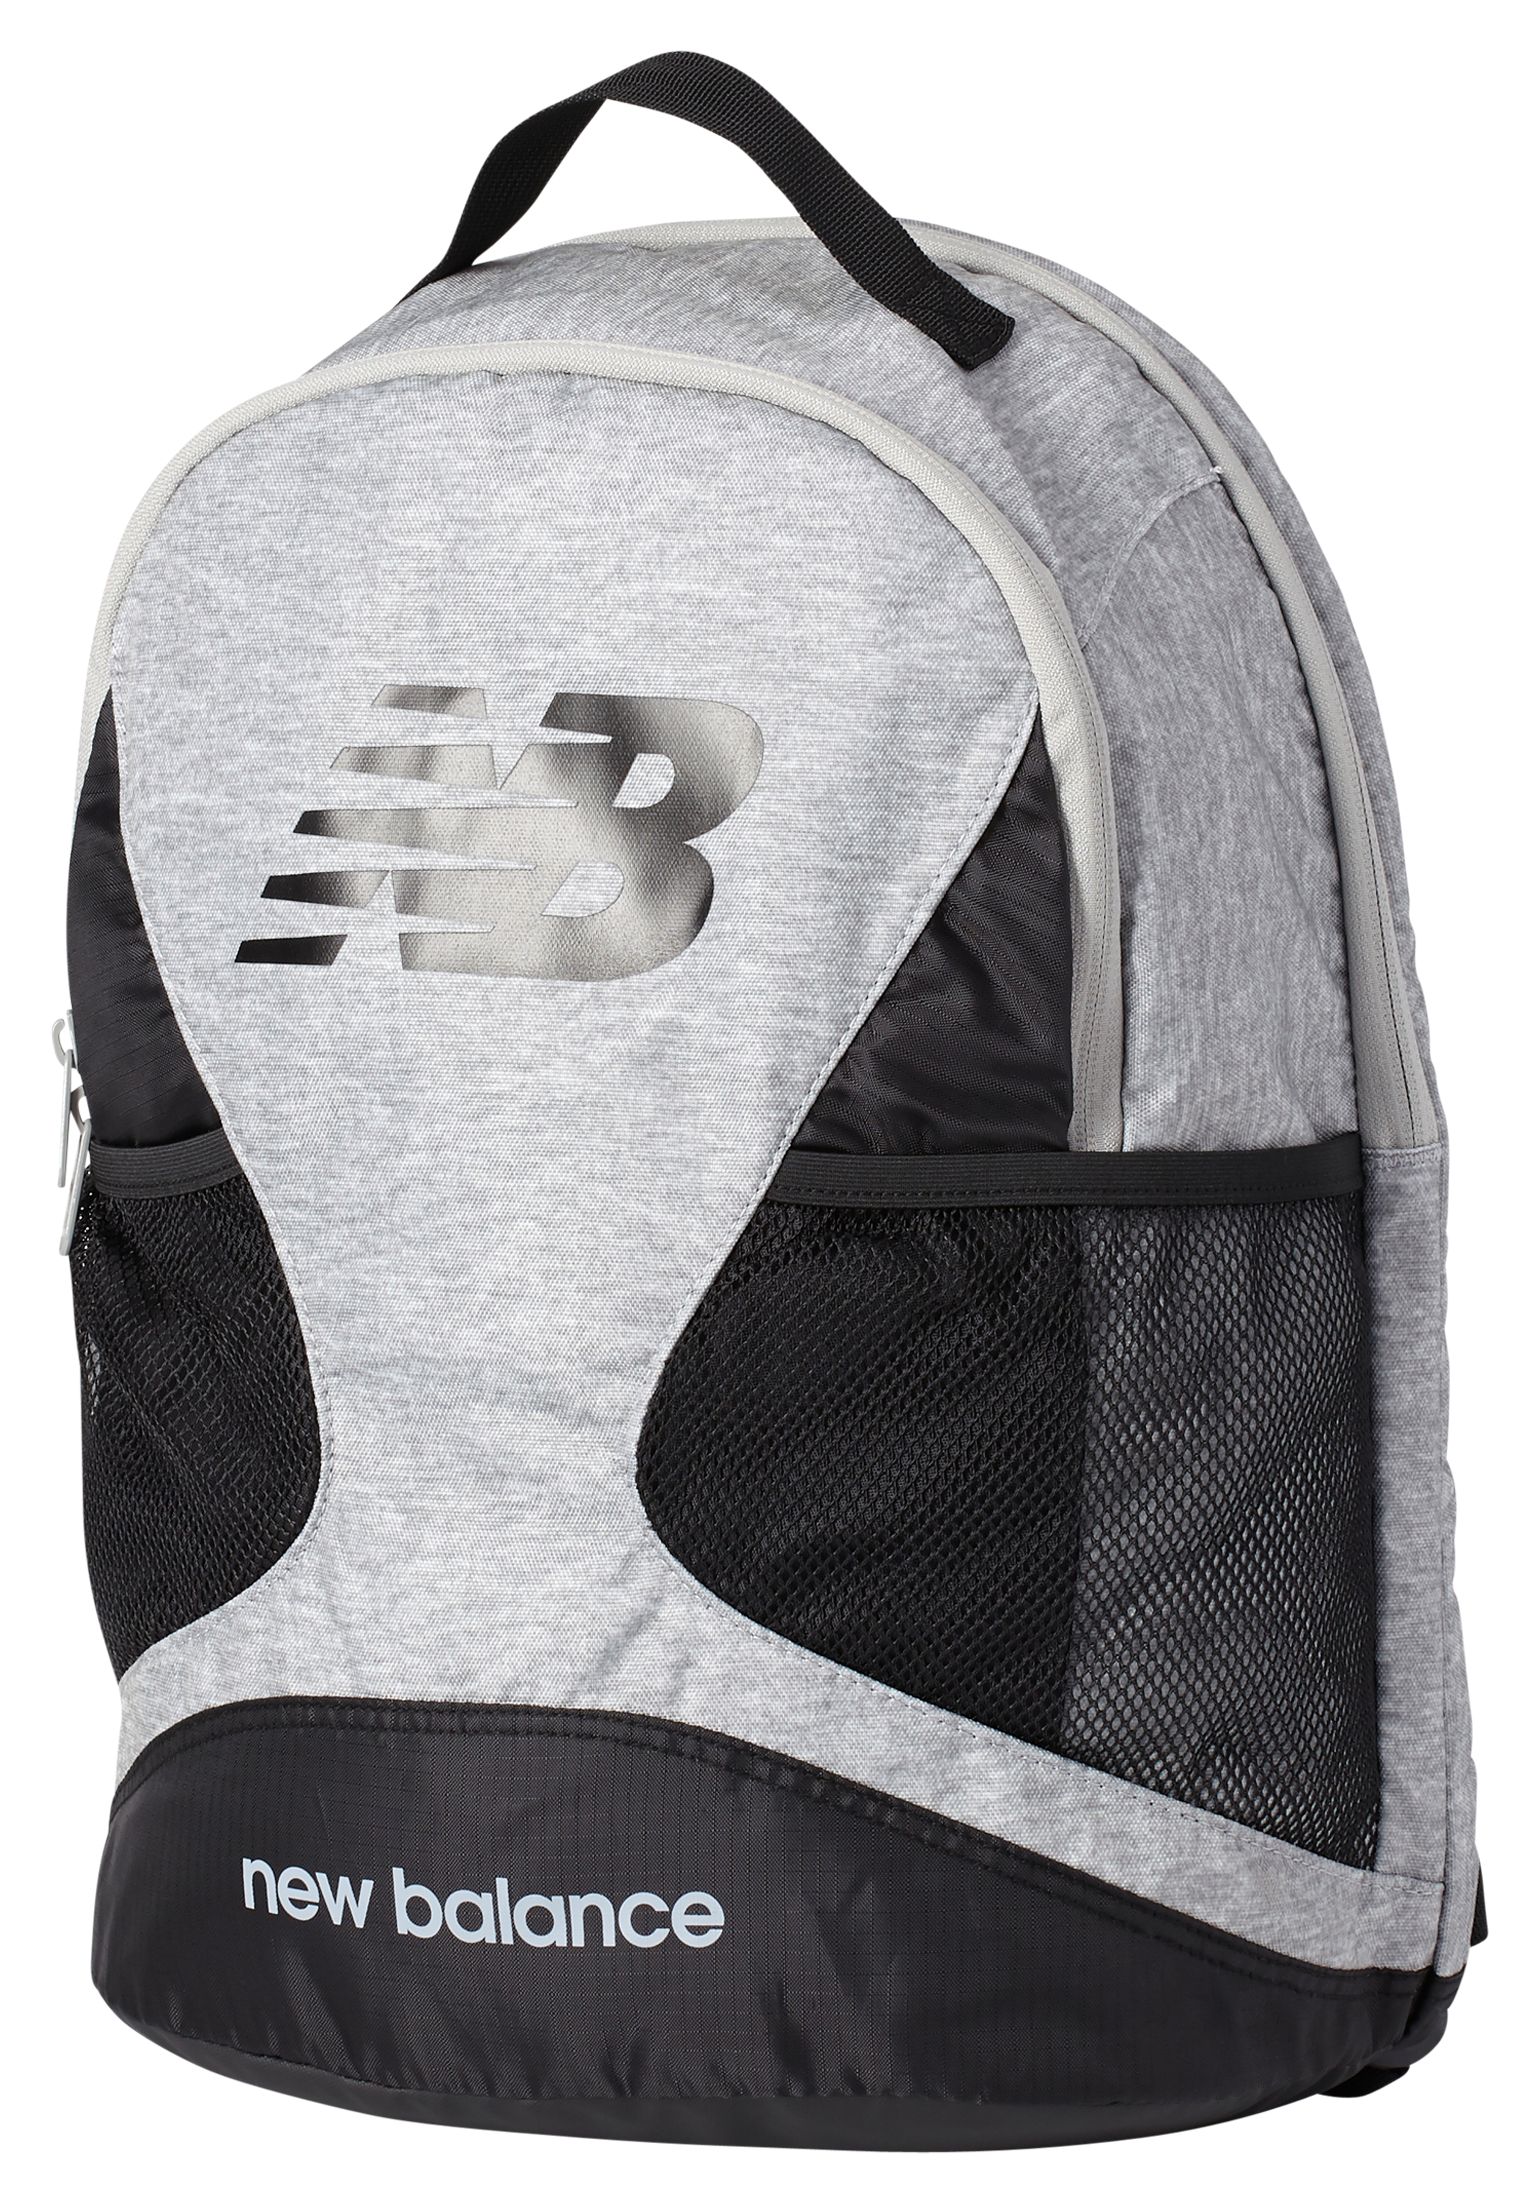 Players Backpack AOP - New Balance